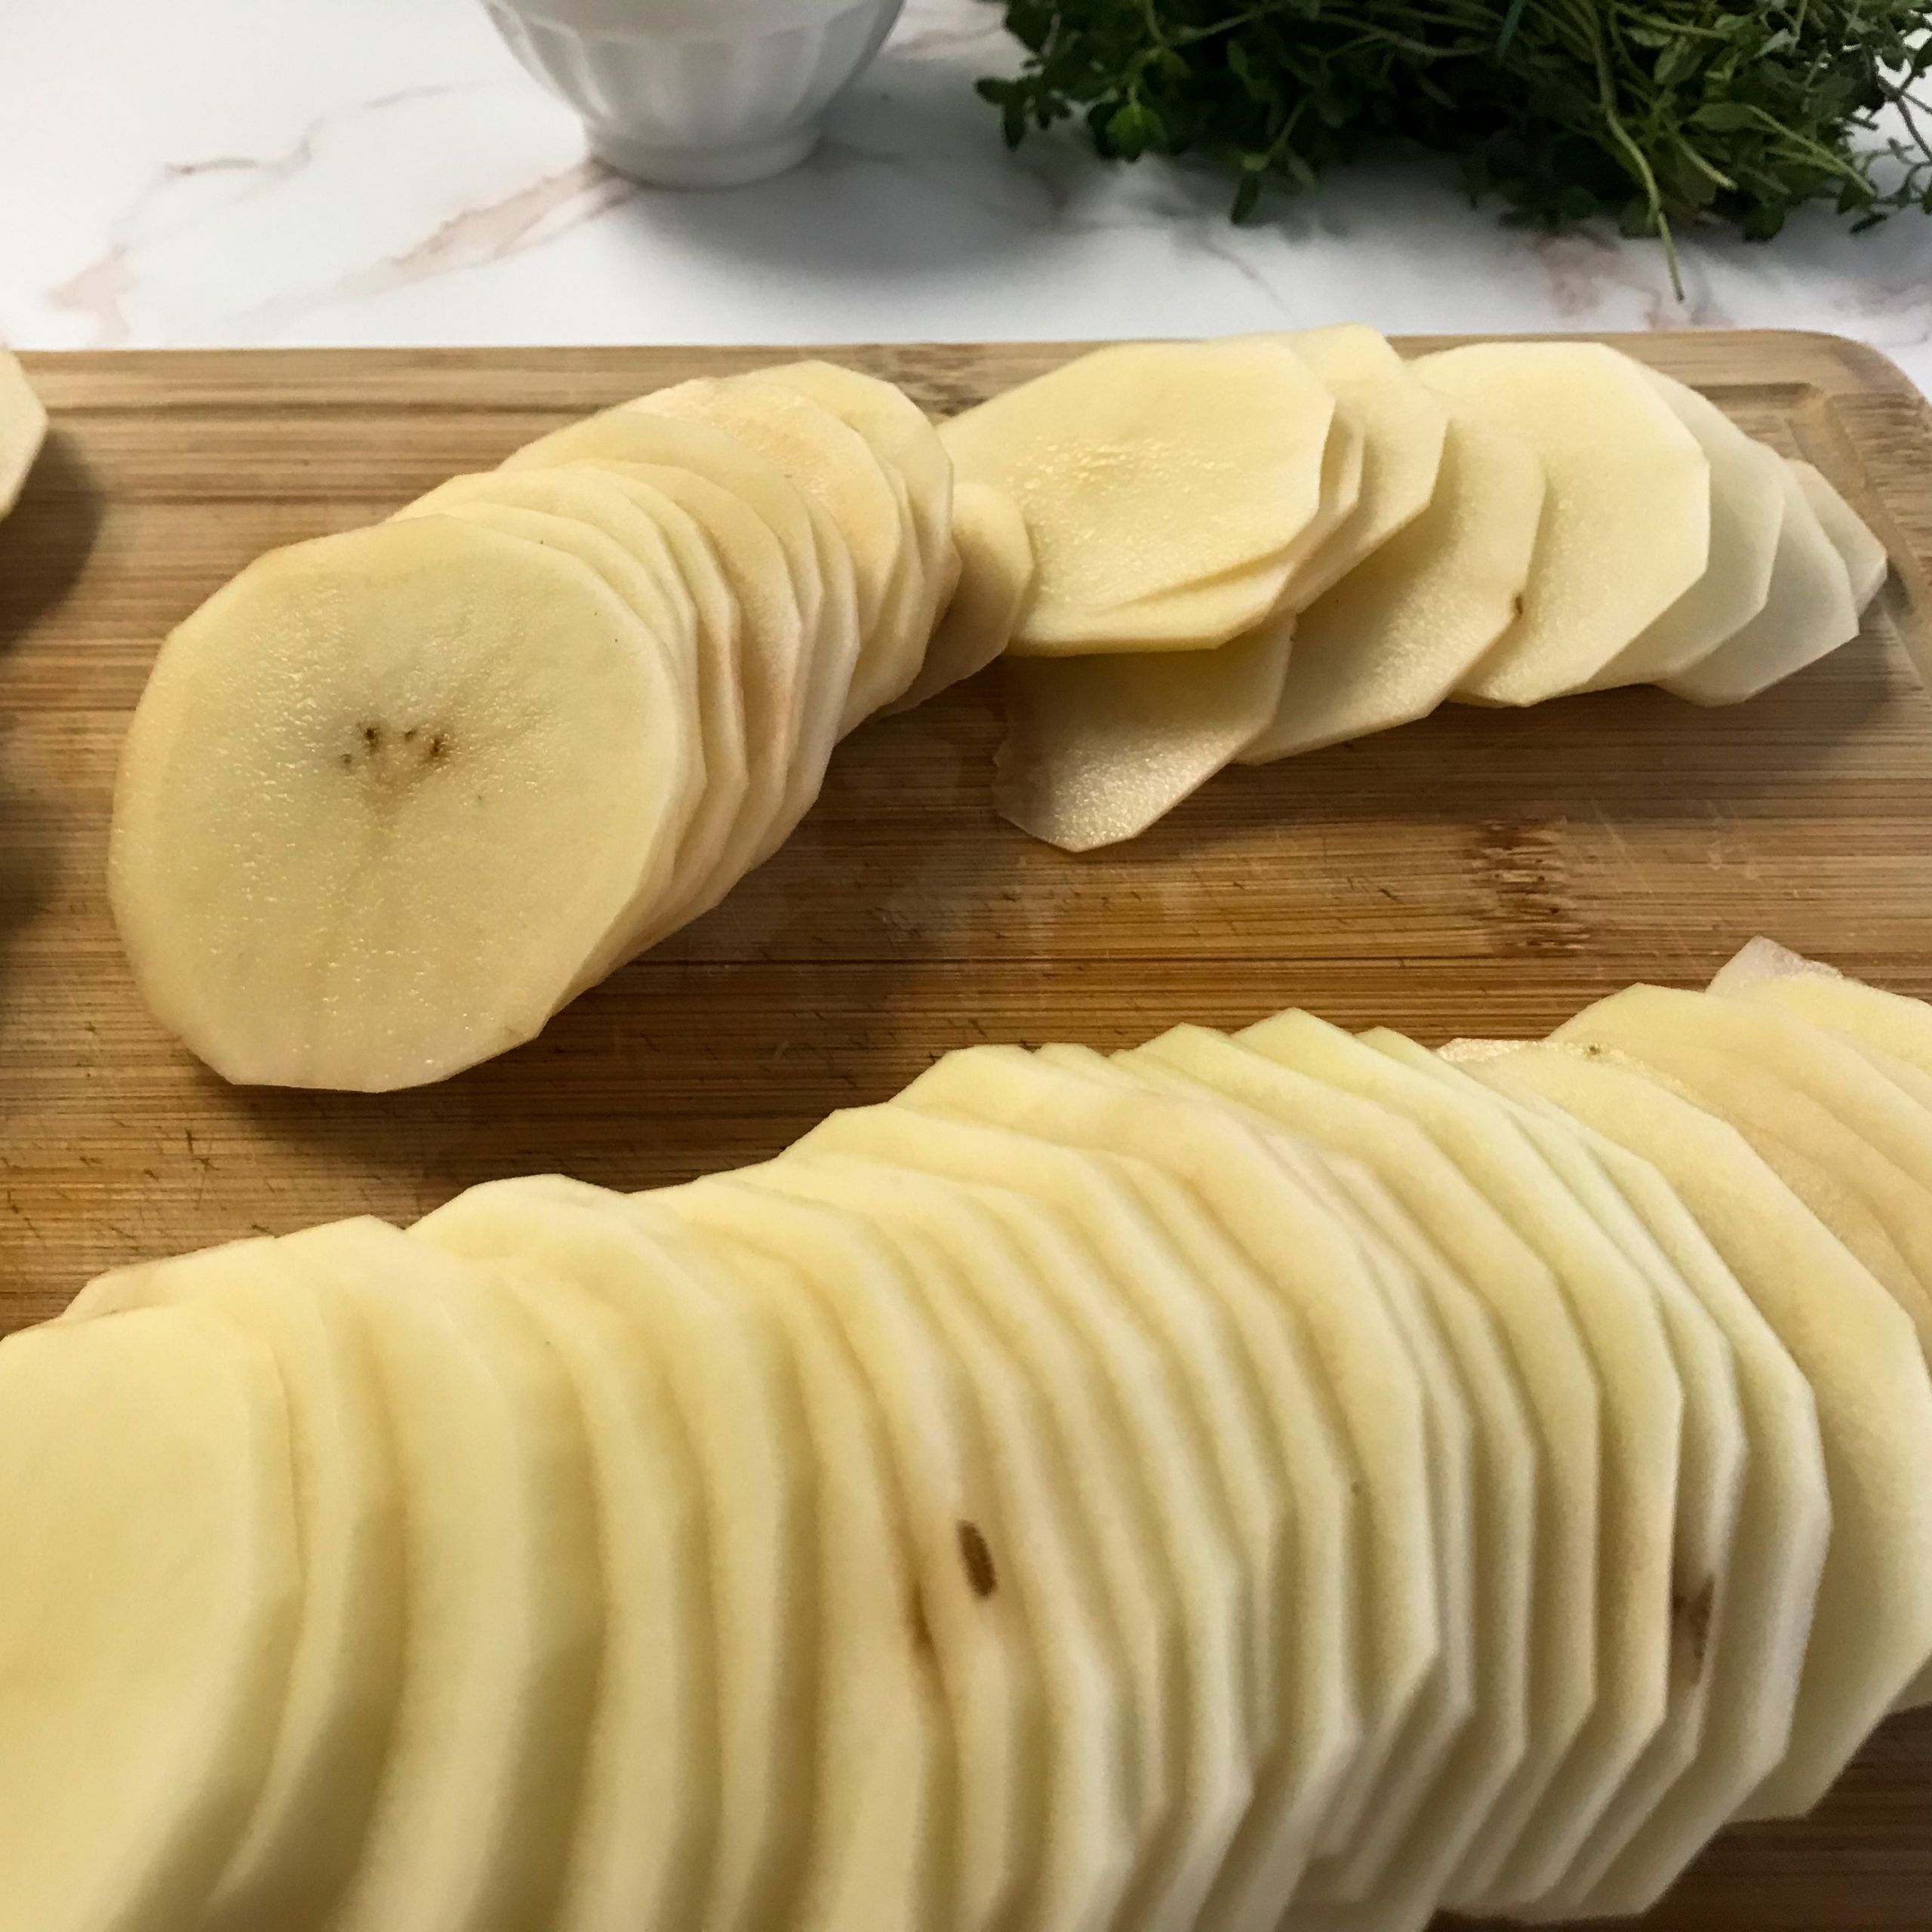 sliced potatoes on a cutting board | my curated tastes